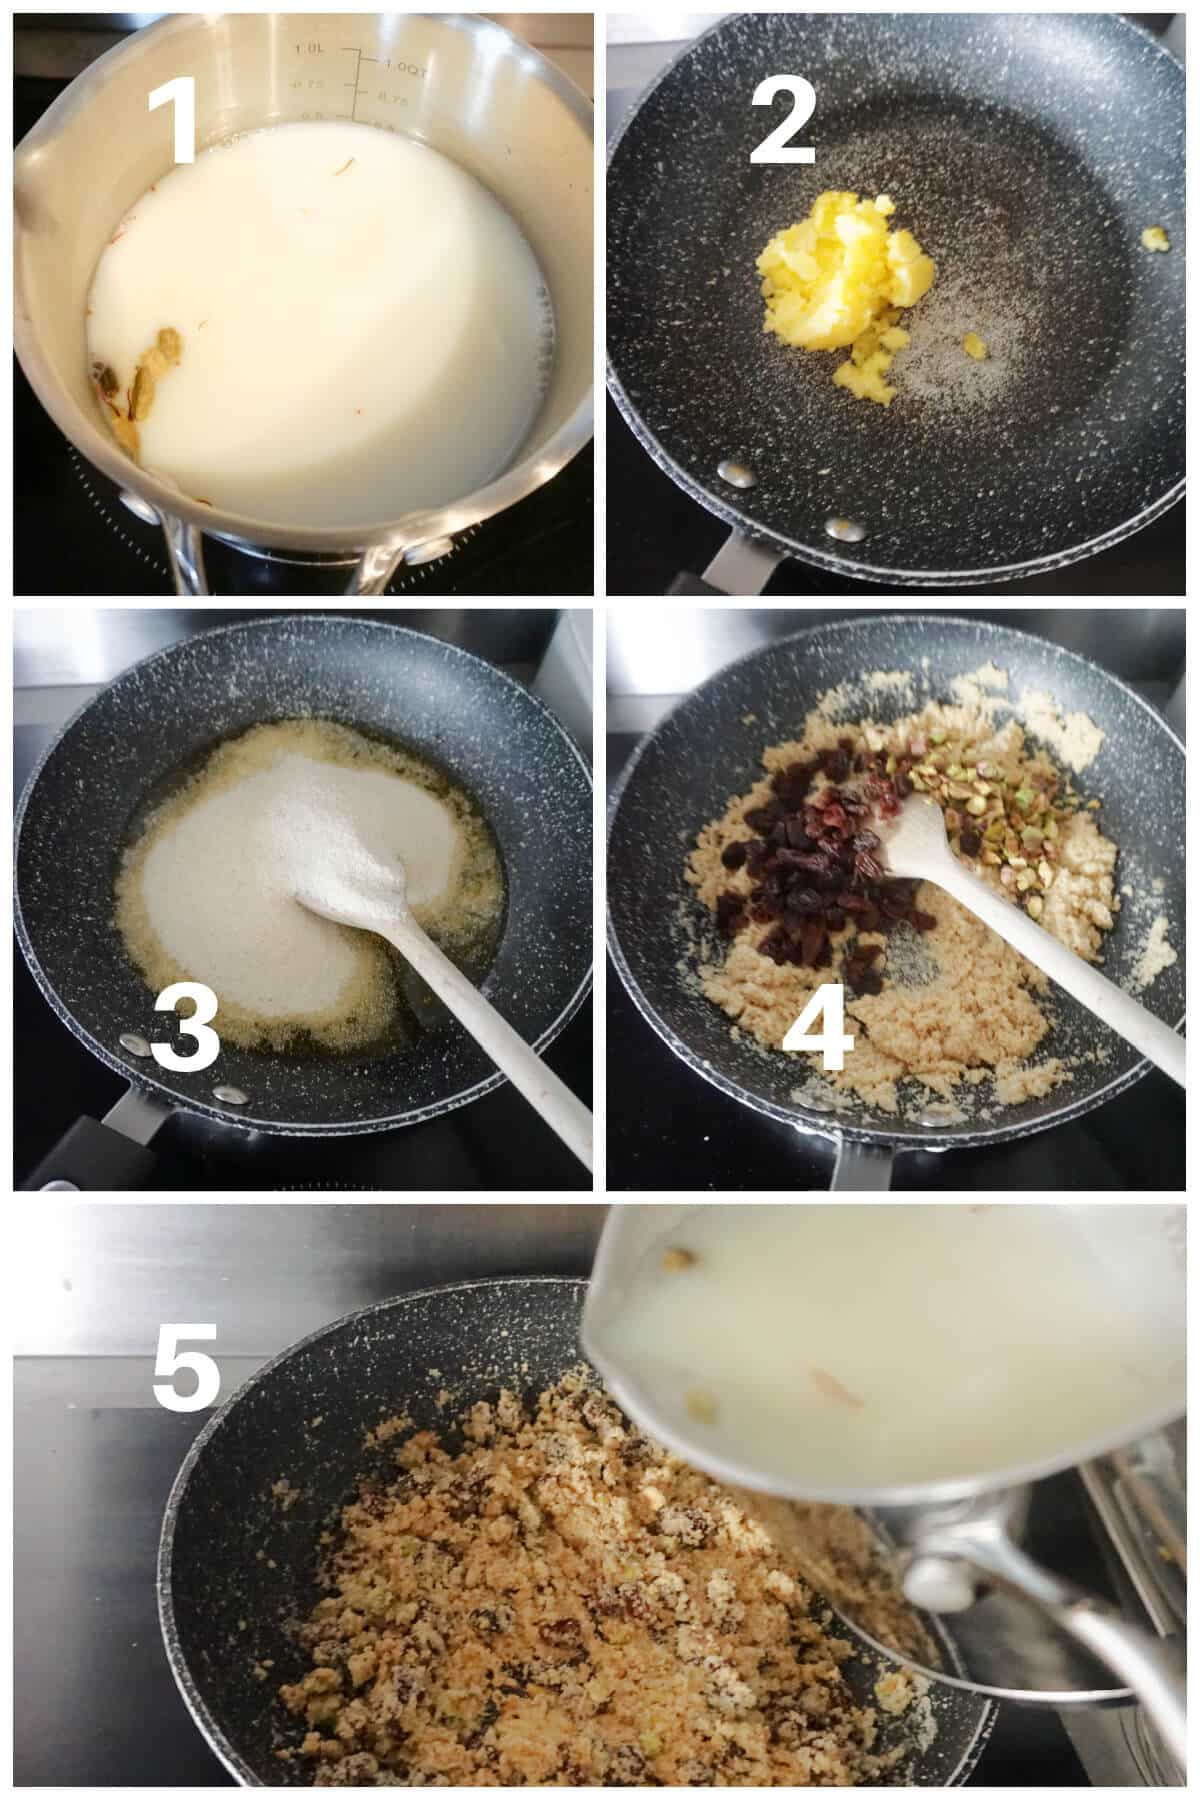 Collage of 5 photos to show how to make Indian semolina pudding.